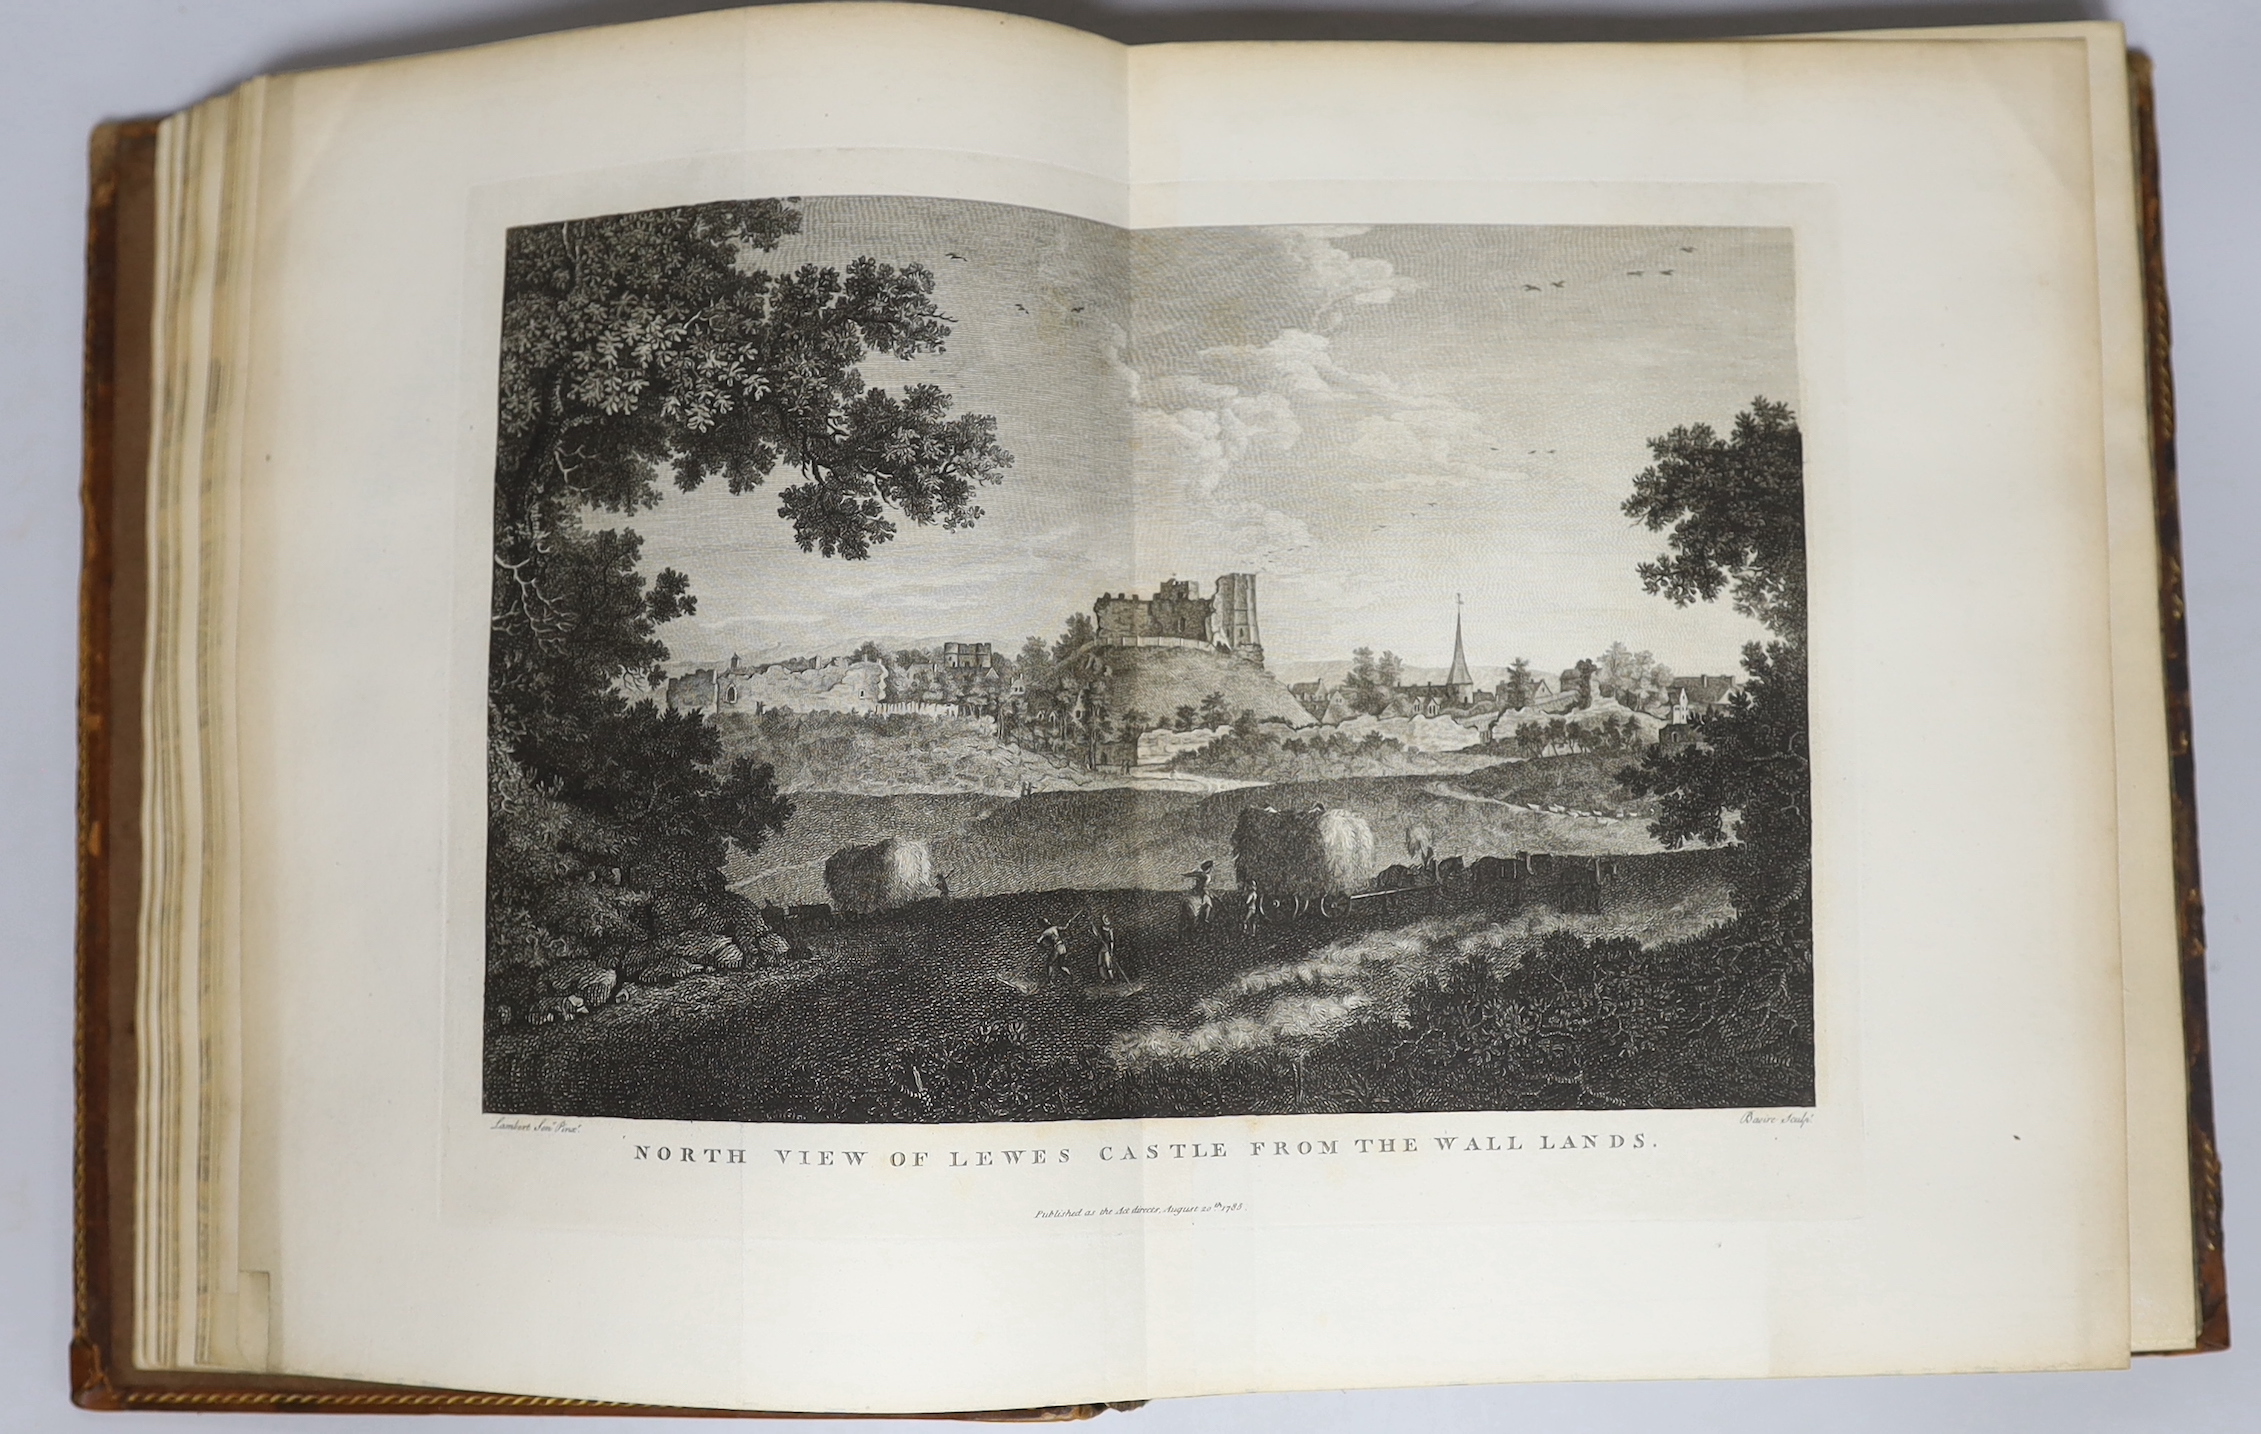 LEWES AND SURREY -Watson, Rev. John - Memoirs of the Ancient Earls of Warren and Surrey and their Descendants to the Present Time, 2 vols, 1st published edition, 4to, diced calf rebacked, engraved portrait frontispiece,